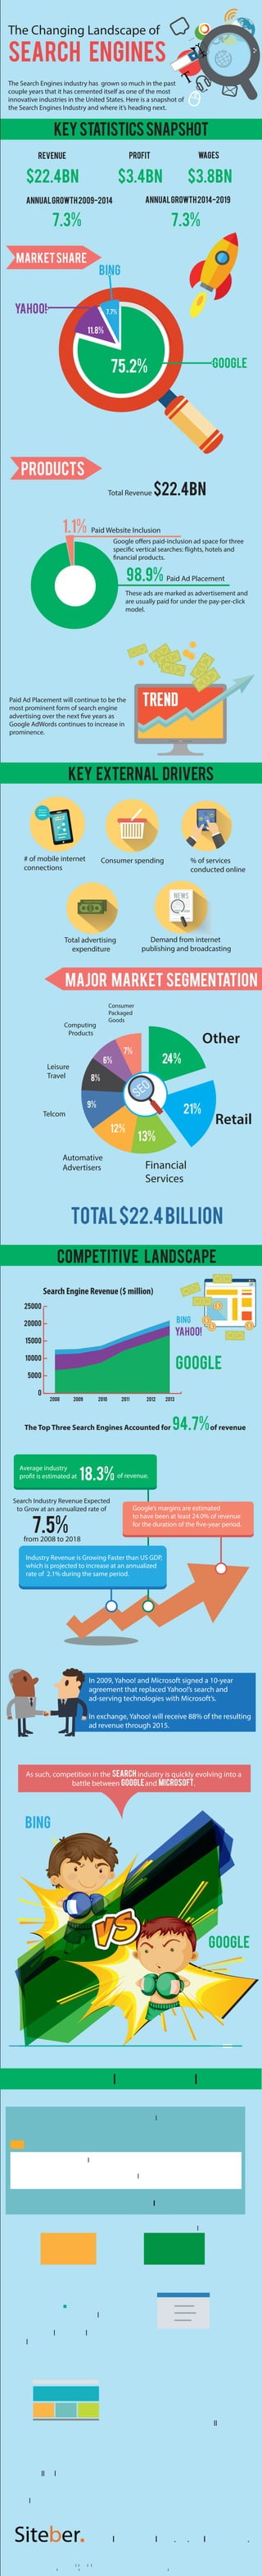 The Changing Landscape of 
Search Engines 
The Search Engines industry has grown so much in the past 
couple years that it has cemented itself as one of the most 
innovative industries in the United States. Here is a snapshot of 
the Search Engines Industry and where it’s heading next. 
Key Statistics Snapshot 
Revenue 
$22.4bn 
Annual Growth 2009-2014 
7.3% 
Annual Growth 2014-2019 
7.3% 
Profit 
$3.4bn 
Wages 
$3.8bn 
Market Share 
Yahoo! 7.7% 
75.2% 
11.8% 
Total Revenue $22.4bn 
google 
Google oers paid-inclusion ad space for three 
specic vertical searches: ights, hotels and 
nancial products. 
98.9% Paid Ad Placement 
Consumer spending % of services 
conducted online 
Demand from internet 
publishing and broadcasting 
Major Market Segmentation 
Yahoo! 
products 
1.1% Paid Website Inclusion 
Key External Drivers 
# of mobile internet 
connections 
Total advertising 
expenditure 
Computing 
Products 
Leisure 
Travel 
Telcom 
Competitive landscape 
google 
The Top Three Search Engines Accounted for 94.7% of revenue 
Average industry 
prot is estimated at 18.3%of revenue. 
Google’s margins are estimated 
to have been at least 24.0% of revenue 
for the duration of the ve-year period. 
Search Industry Revenue Expected 
to Grow at an annualized rate of 
Industry Revenue is Growing Faster than US GDP, 
which is projected to increase at an annualized 
rate of 2.1% during the same period. 
In 2009, Yahoo! and Microsoft signed a 10-year 
agreement that replaced Yahoo!’s search and 
ad-serving technologies with Microsoft’s. 
In exchange, Yahoo! will receive 88% of the resulting 
ad revenue through 2015. 
google 
bing 
bing 
bing 
These ads are marked as advertisement and 
are usually paid for under the pay-per-click 
model. 
Paid Ad Placement will continue to be the 
most prominent form of search engine 
advertising over the next ve years as 
Google AdWords continues to increase in 
prominence. 
Search Engine Revenue ($ million) 
As such, competition in the search industry is quickly evolving into a 
battle between Google and Microsoft. 
Other 
Retail 
Financial 
Services 
Automative 
Advertisers 
Consumer 
Packaged 
Goods 
Total $22.4 billion 
why advertise on search engines 
Adverisers then paid a fee if the user clicks on the ad. 
Search trac organic results receive 
vs 82% 
As such, companies have directed 
signicant portions of their budgets 
toward advertising on search engines. 
7.5% 
from 2008 to 2018 
Search trac ads receive 
20% 
39.0% 
of search engine users believe that 
companies showing up in the top 
search results are the leaders in their 
eld. 
of internet advertising 
expenditures will be 
spent on search engine 
advertising in 2014. 
44% 
21% 
24% 
7% 
6% 
8% 
9% 
12% 
13% 
Search engines derive most of their revenue by delivering ads to 
users based on the search term entered. 
AD 
Under this business model, advertisers create ads targeted to specic keyword 
queries, and the search engine determines which ads to present based on an 
advertiser’s oering price and the ad’s popularity. 
Siteber oers SEO and SEM services 
that will help your business rank high 
on search engines and optimize your 
PPC marketing eort to maximize the 
ROI of your marketing budget. 
Copyright © 2014 by Siteber.com. All rights reserved. 
Sources 
IBISWorld Industry Report 51913a, Search Engines in the US 
http://clients1.ibisworld.com.remote.baruch.cuny.edu/reports/us/industry/default.aspx?entid=1982 
